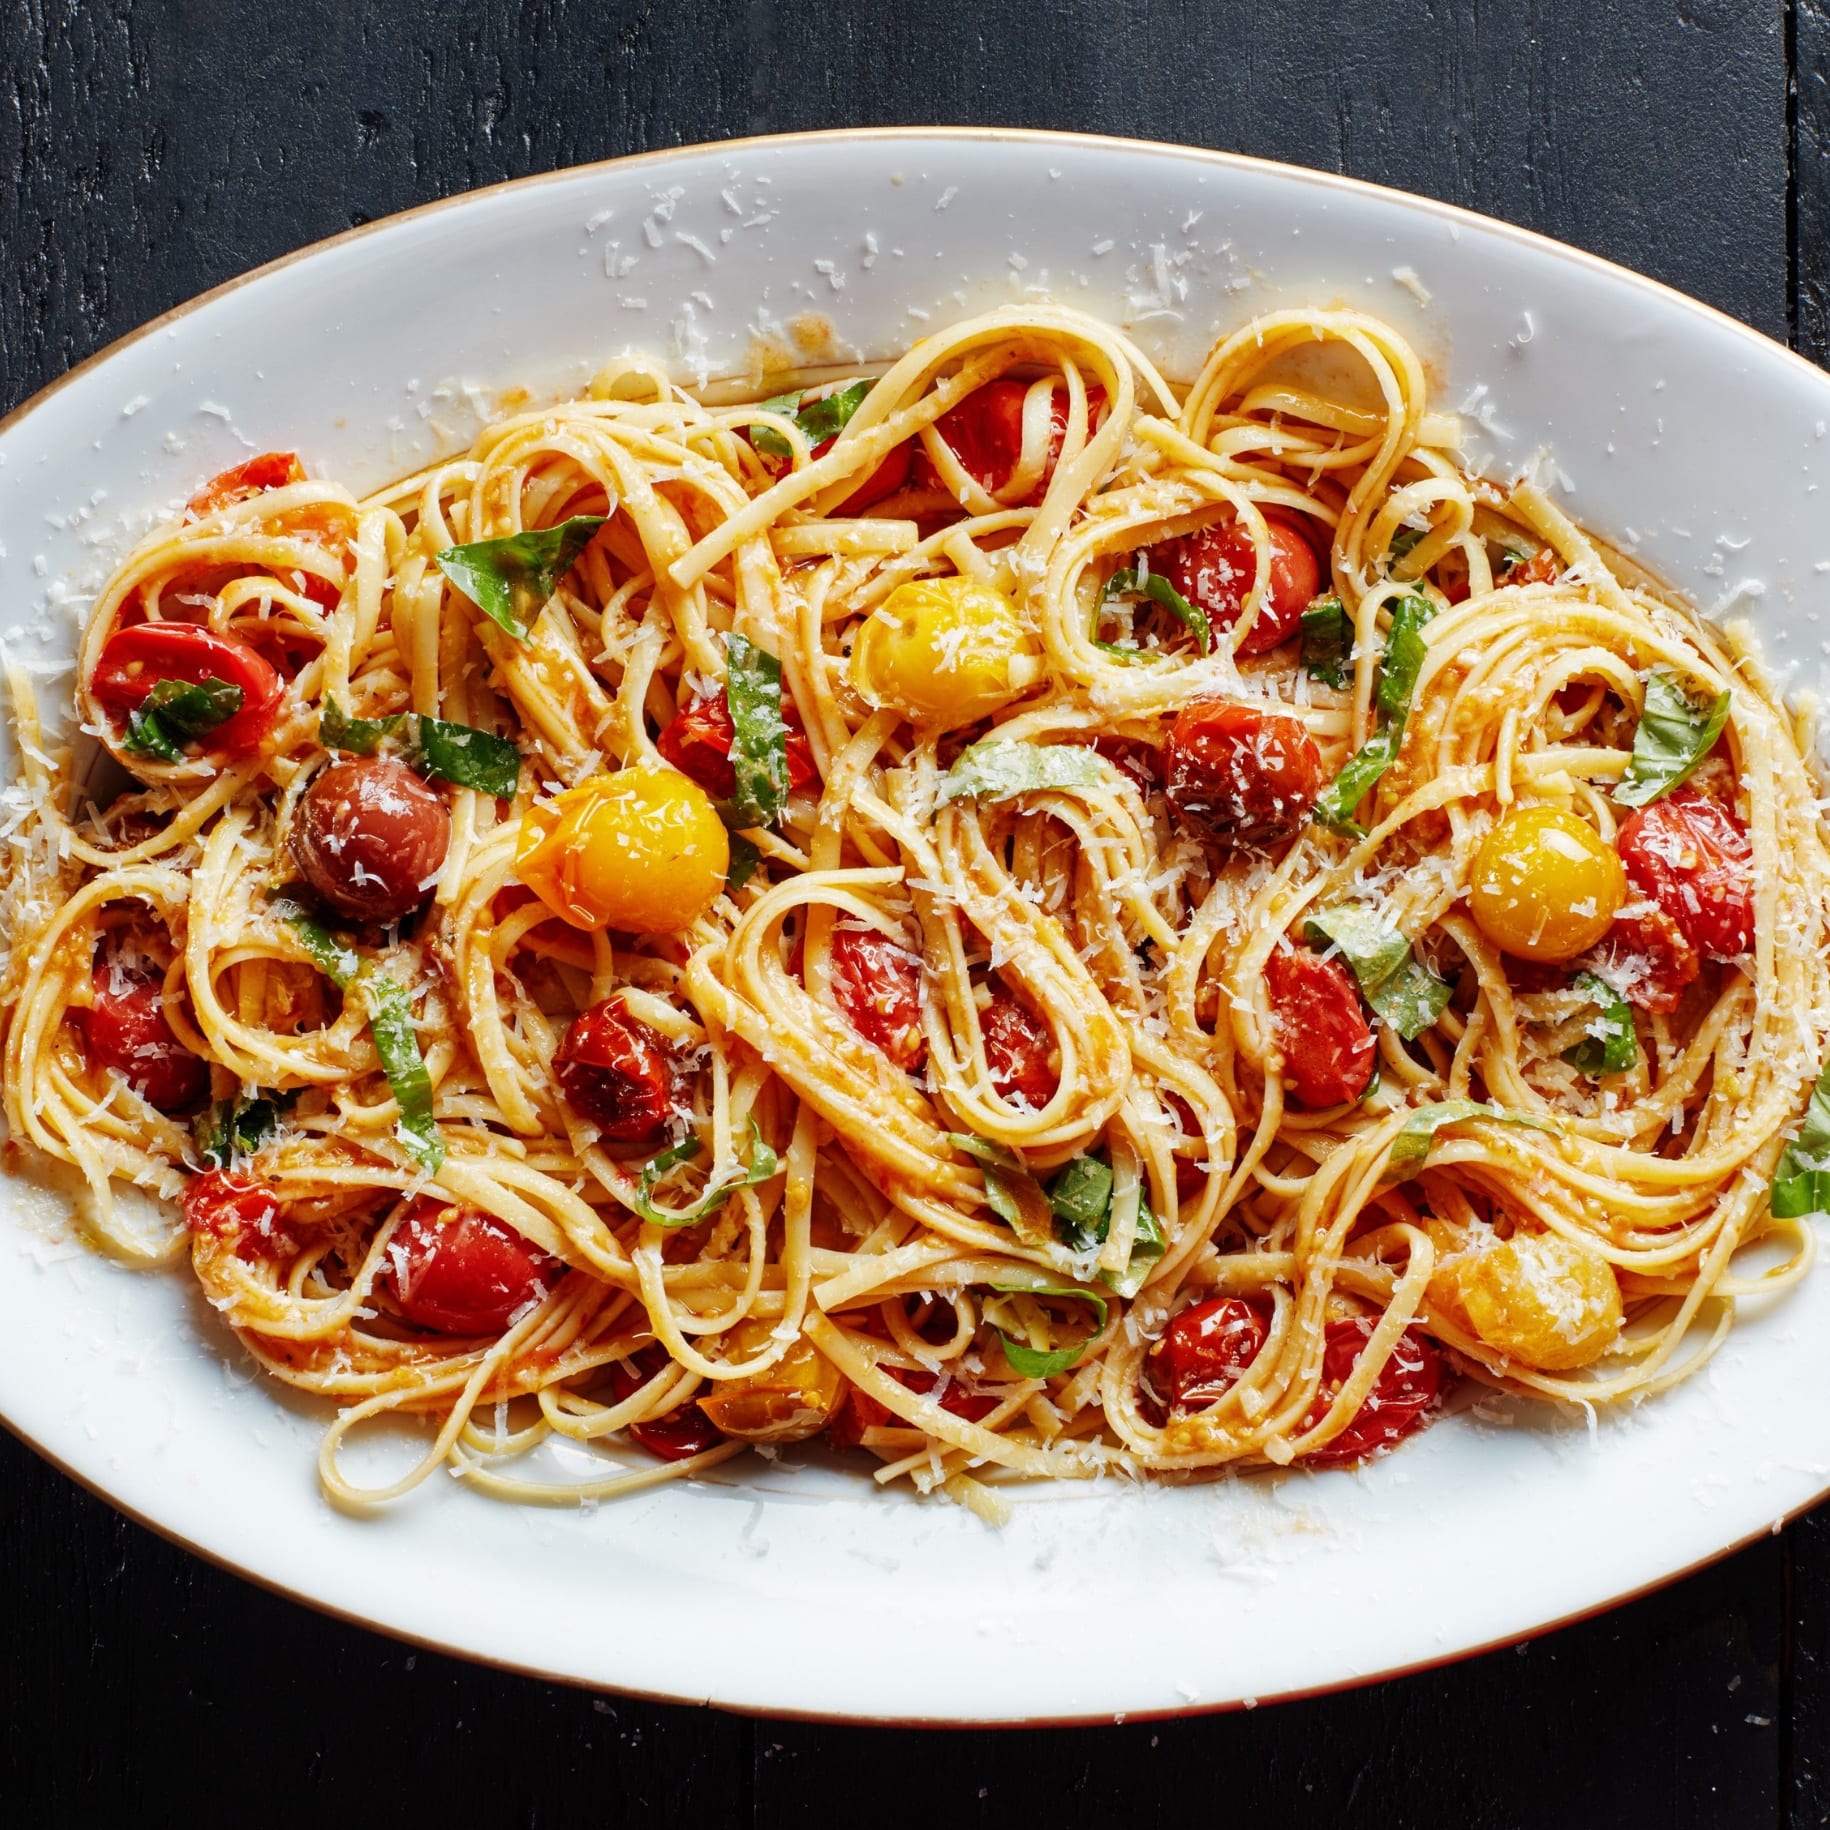 Red and yellow tomato and basil pasta